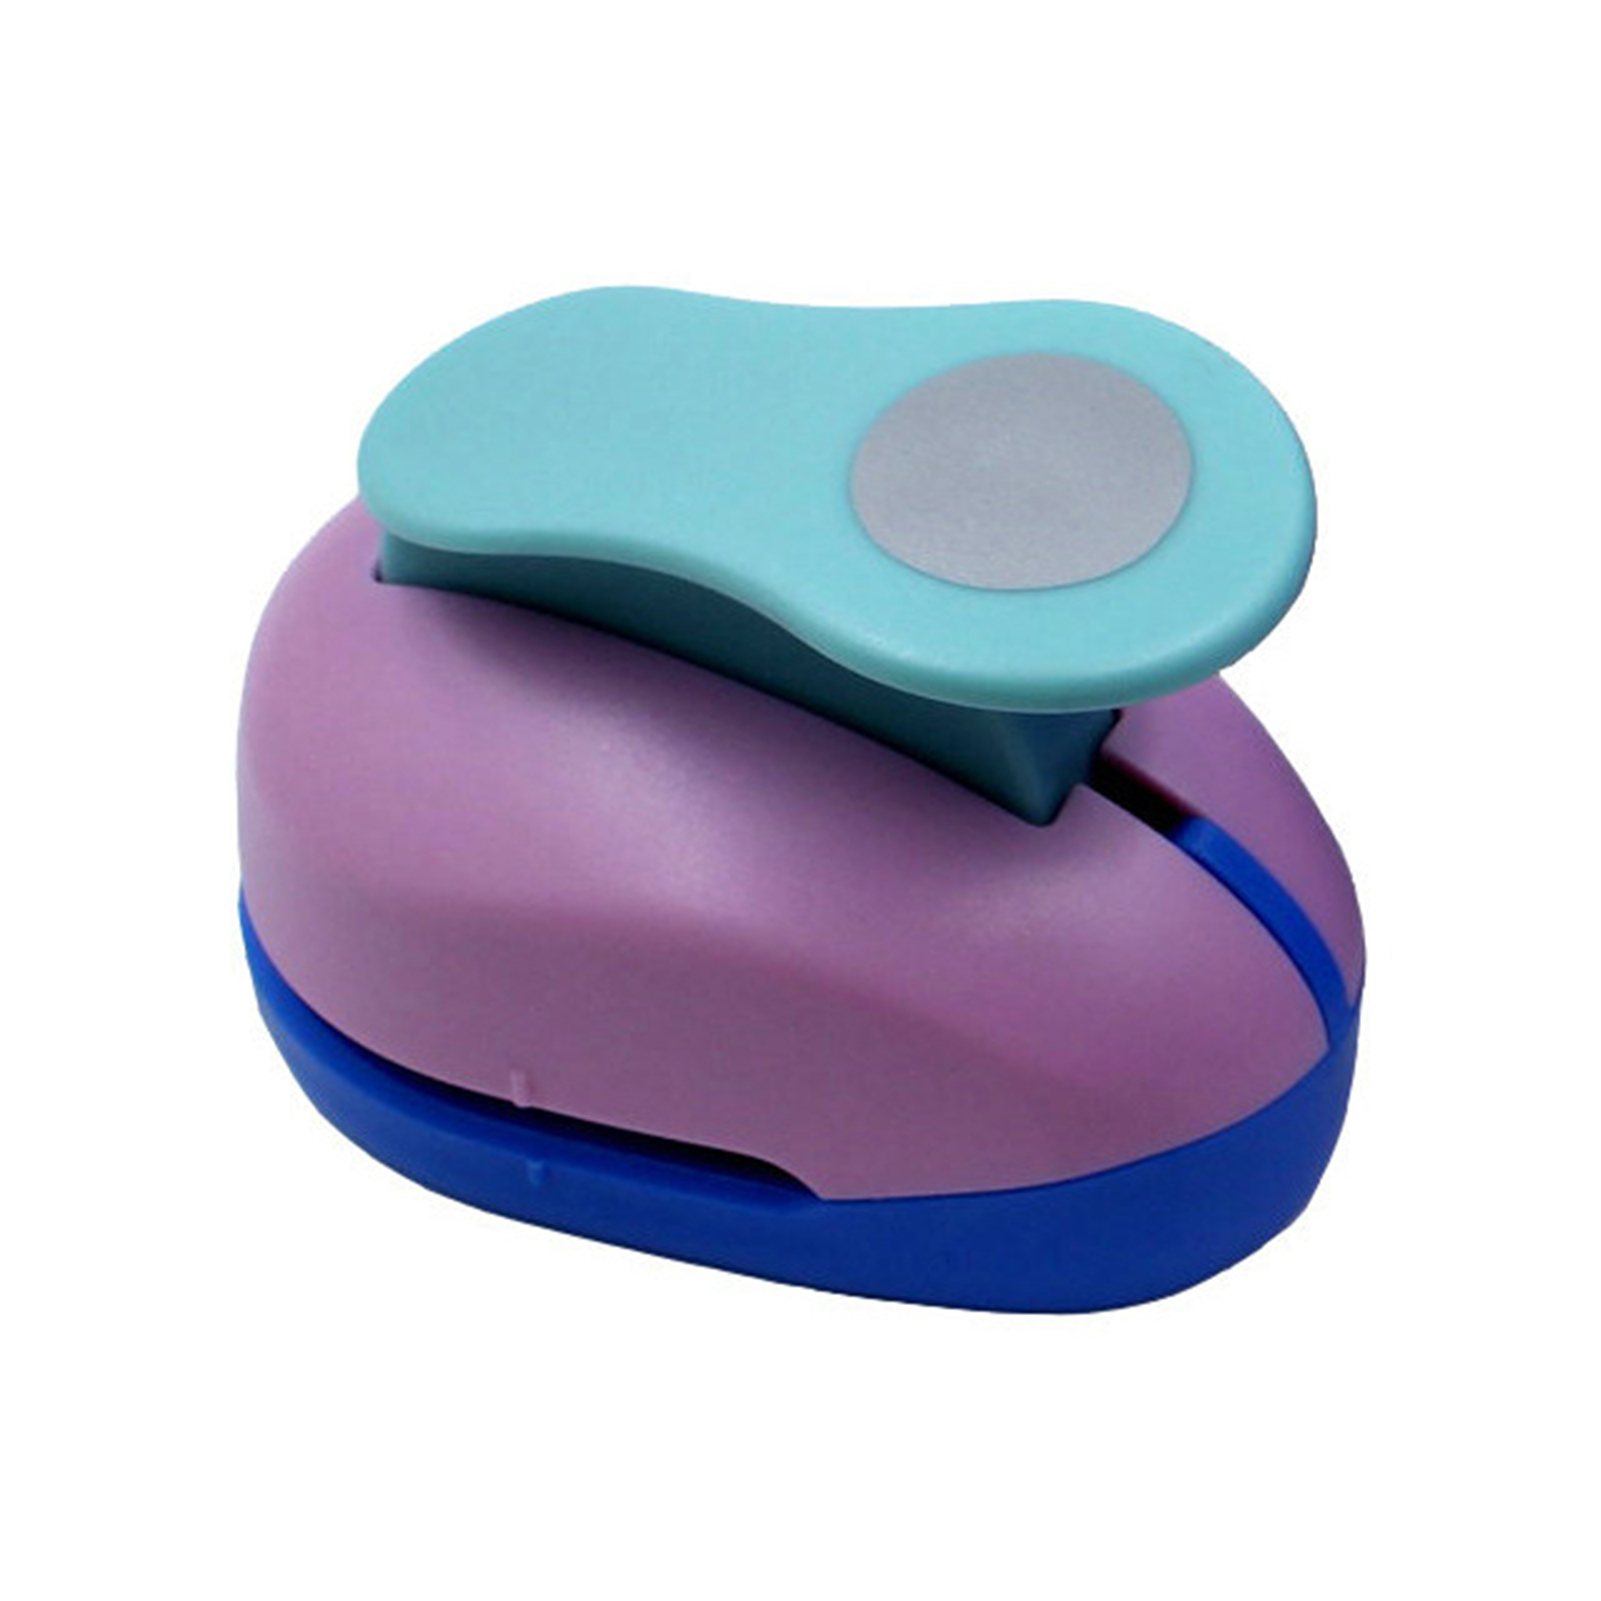 3mm/4mm5mm/6mm/8mm/10mm Circle Hole Punch Paper Punch Hand-held Round  Single Hole Punch